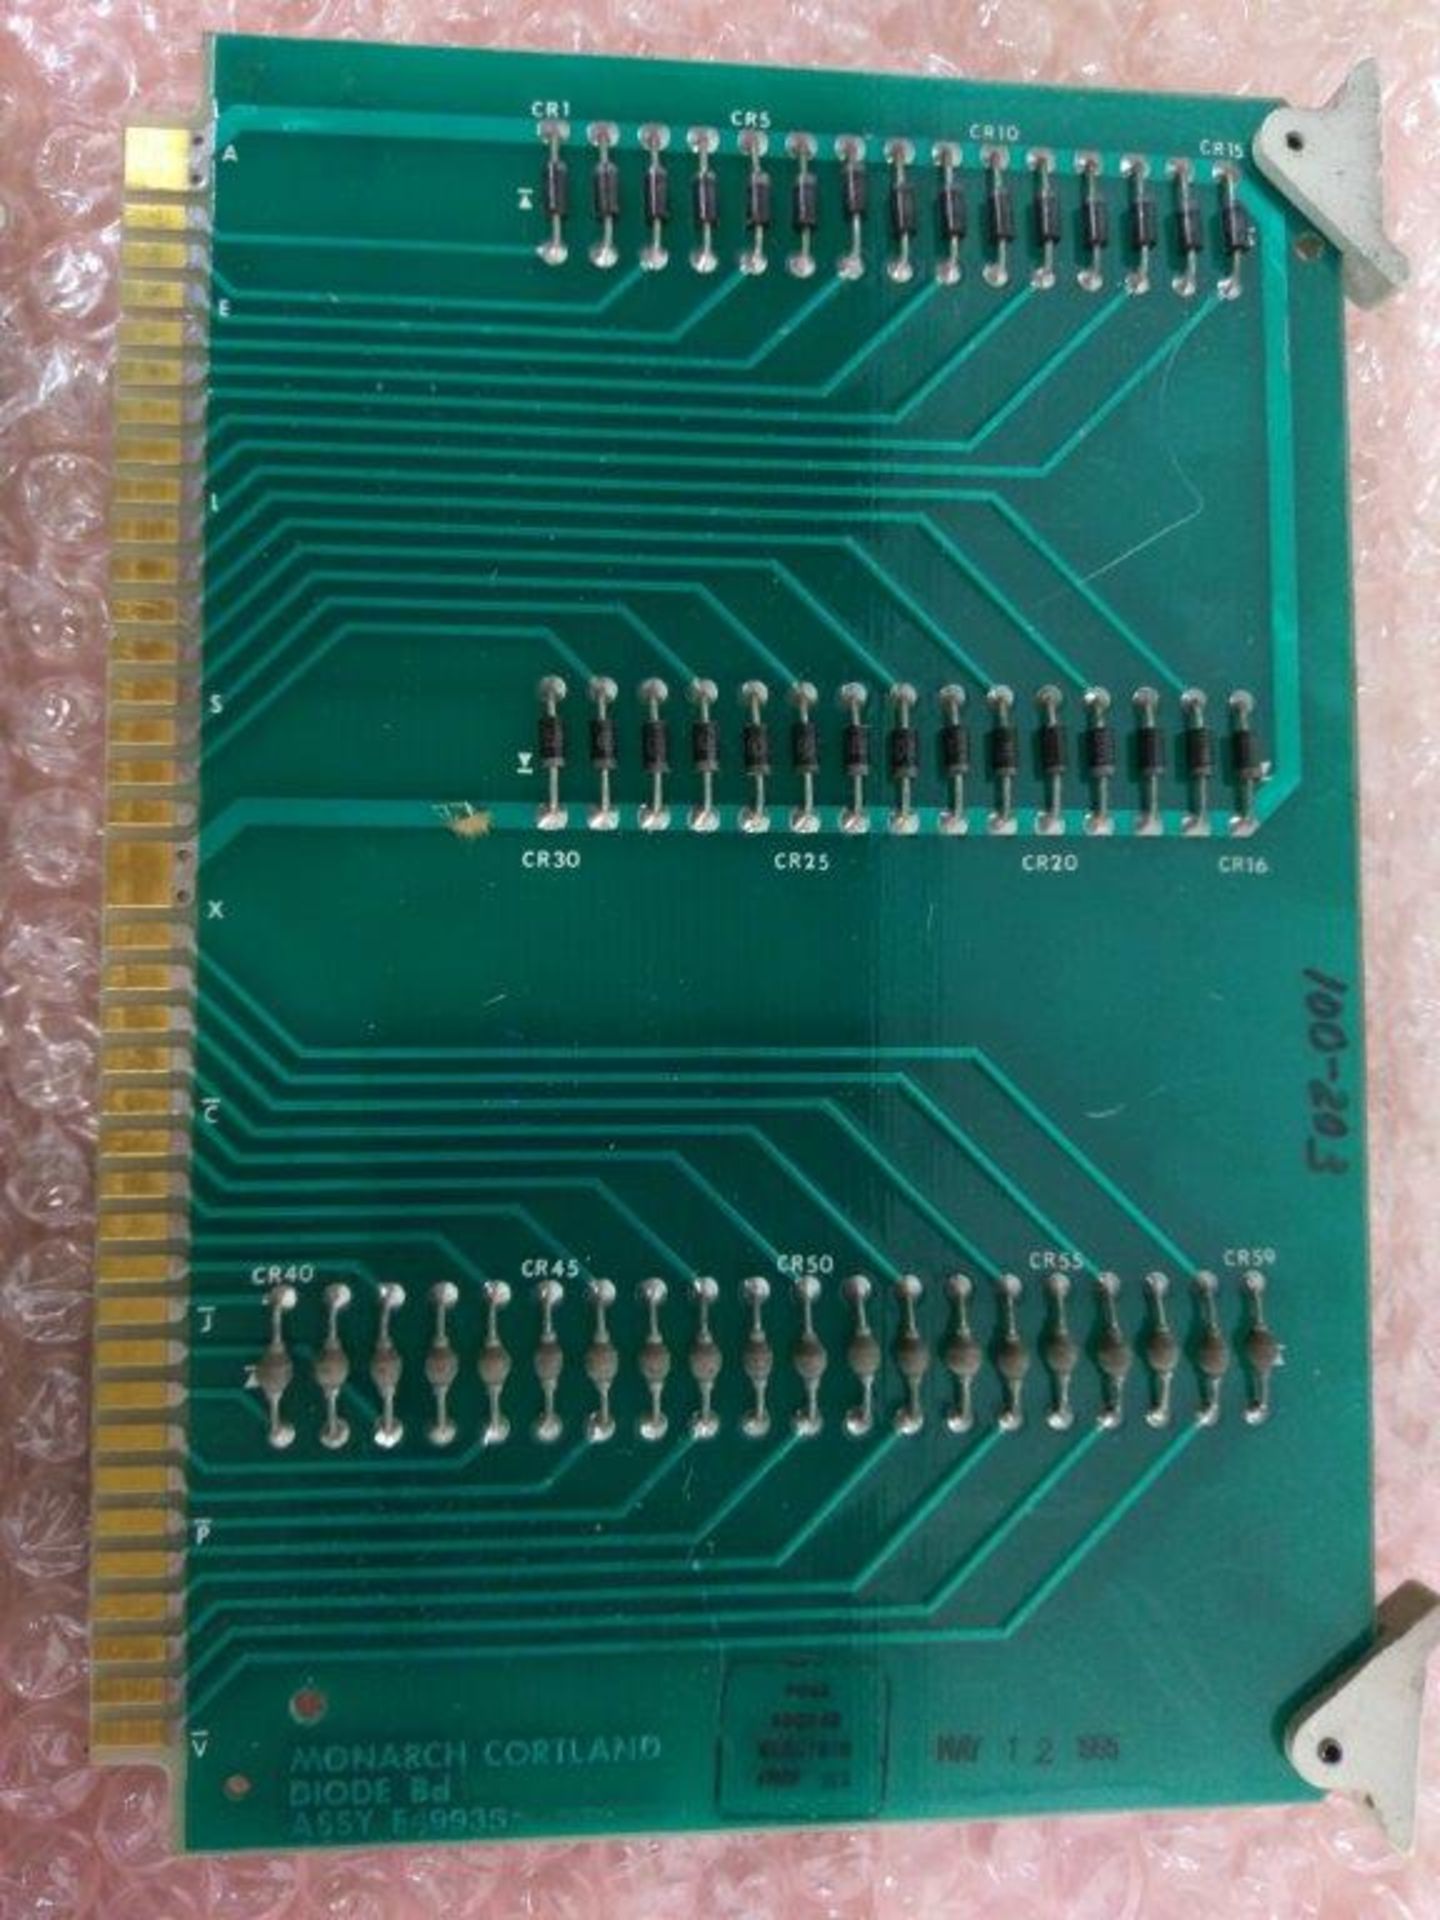 Lot of 4 Industrial Circuit Boards - Monarch Cortland, Bitrode and more - Image 4 of 9